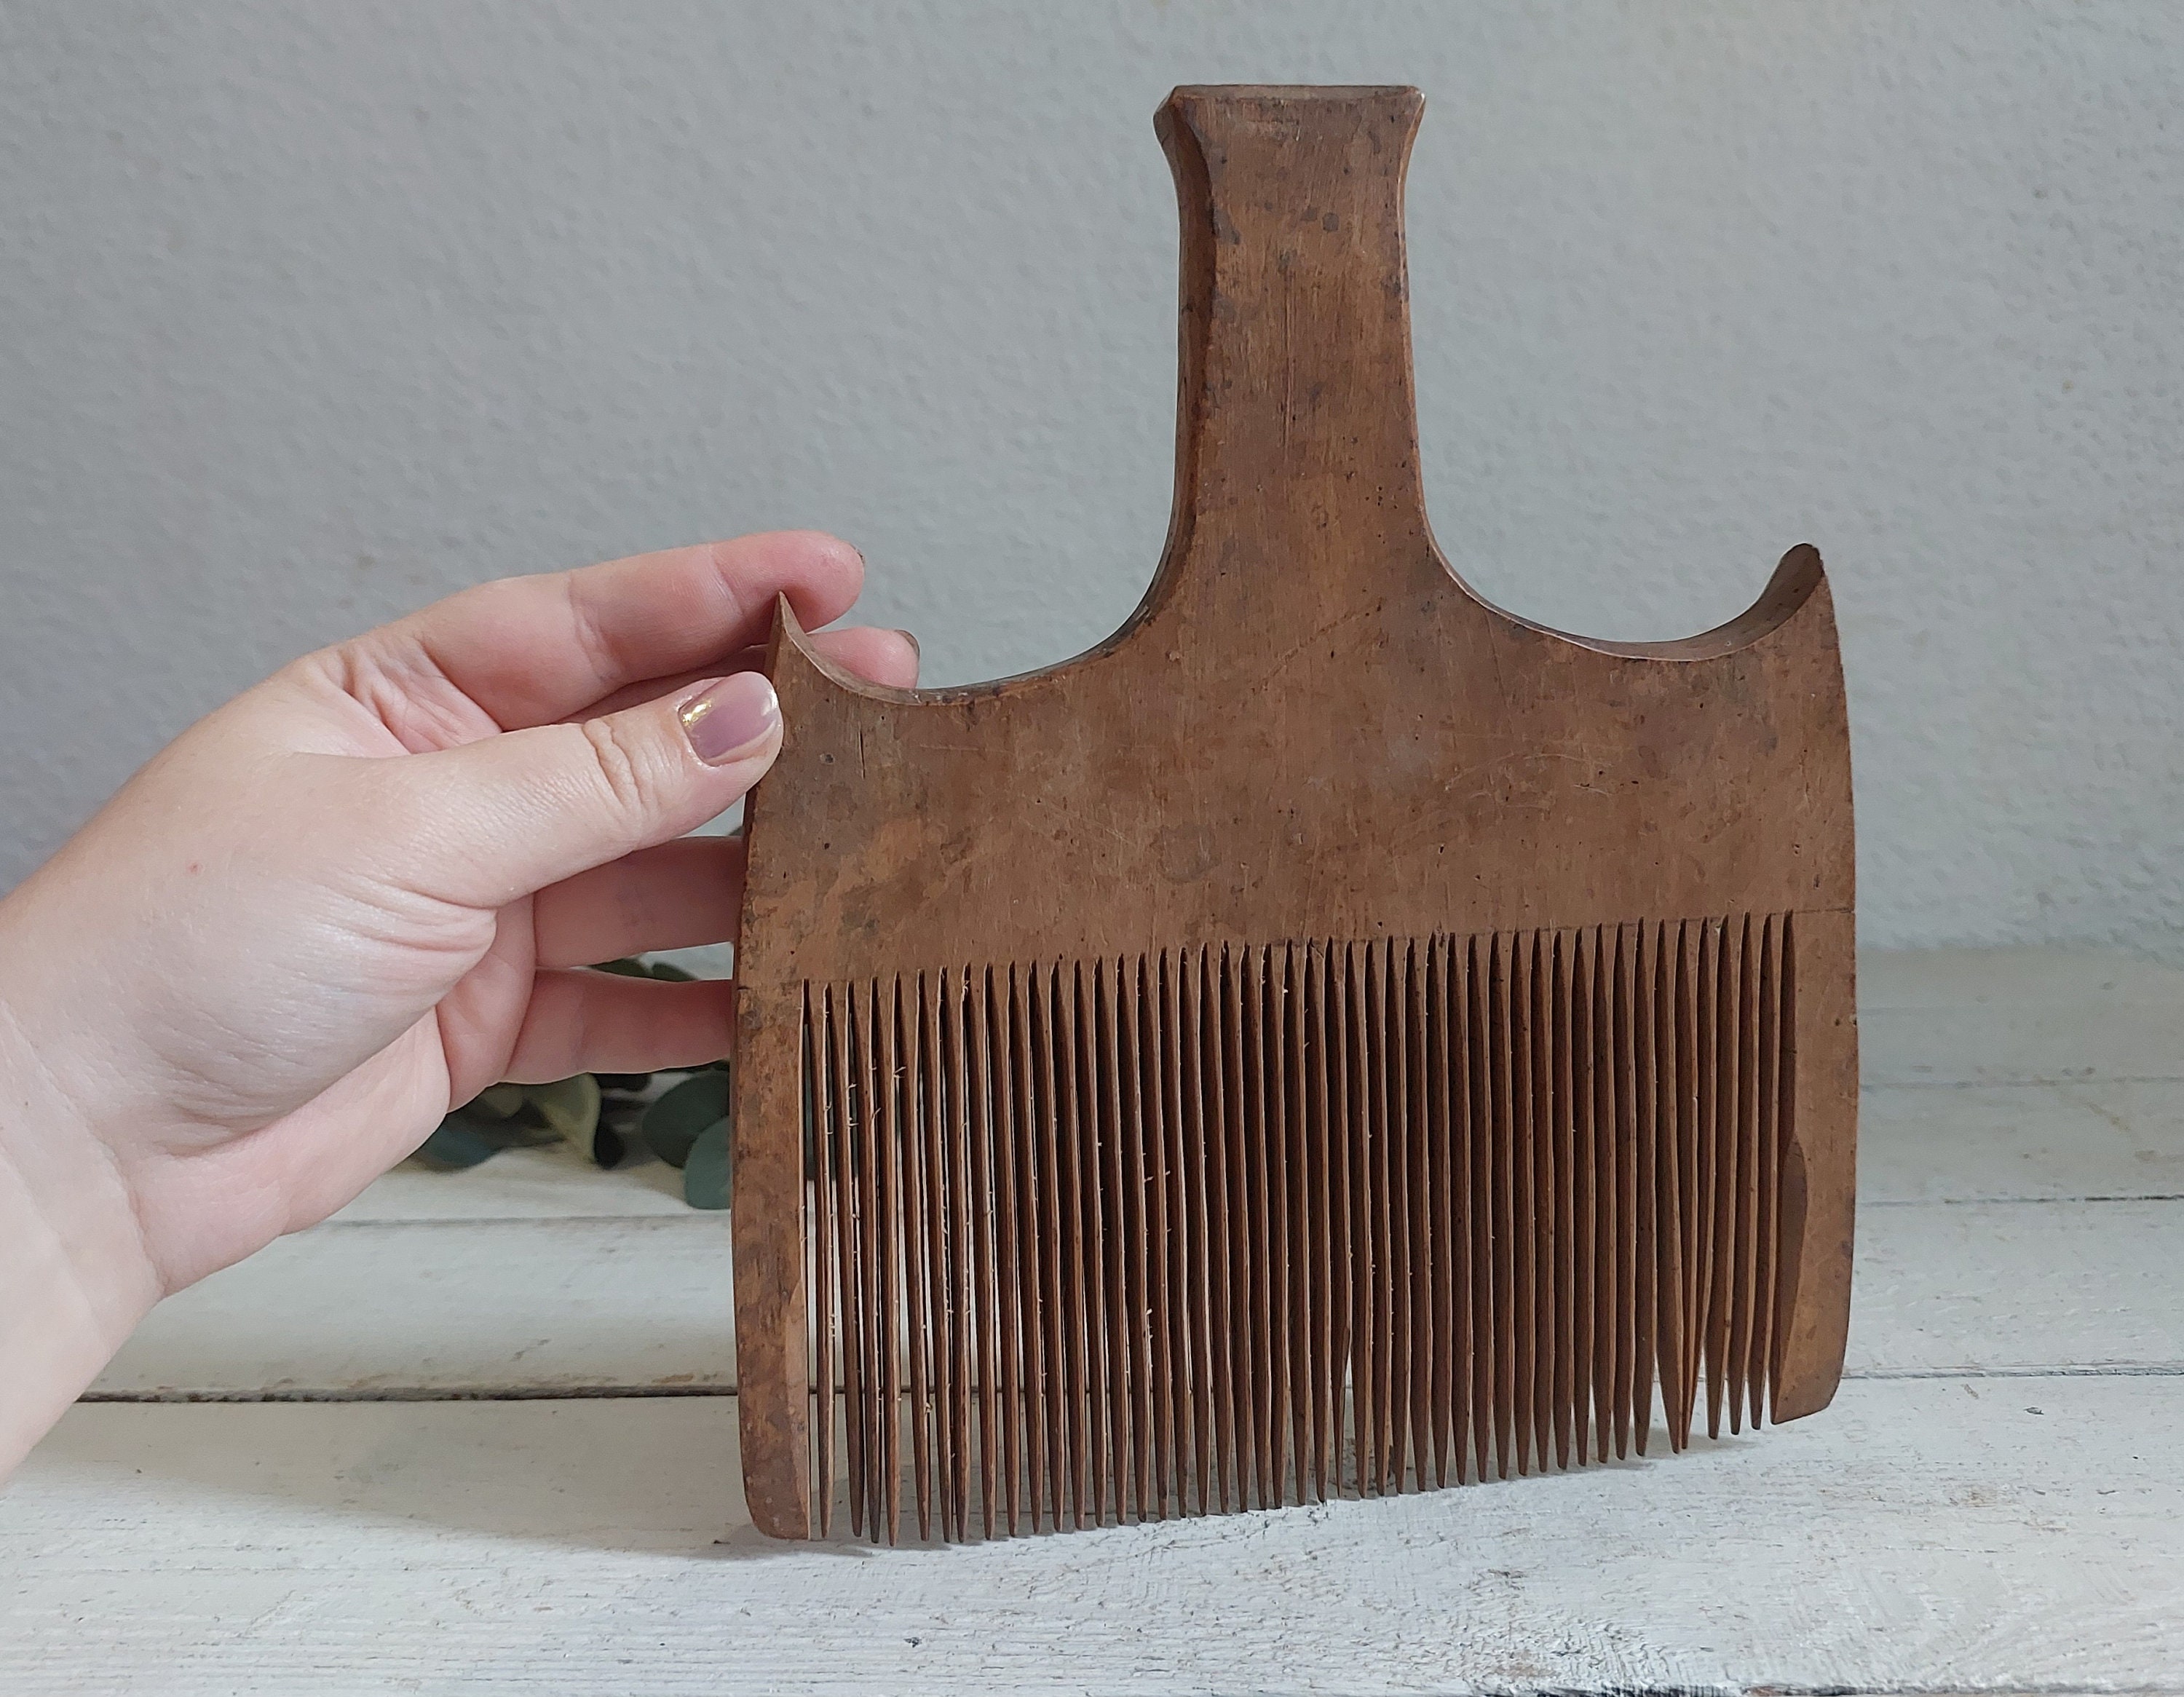 Antique Hand Wool Carding Comb Primitive Wooden Carding Brush